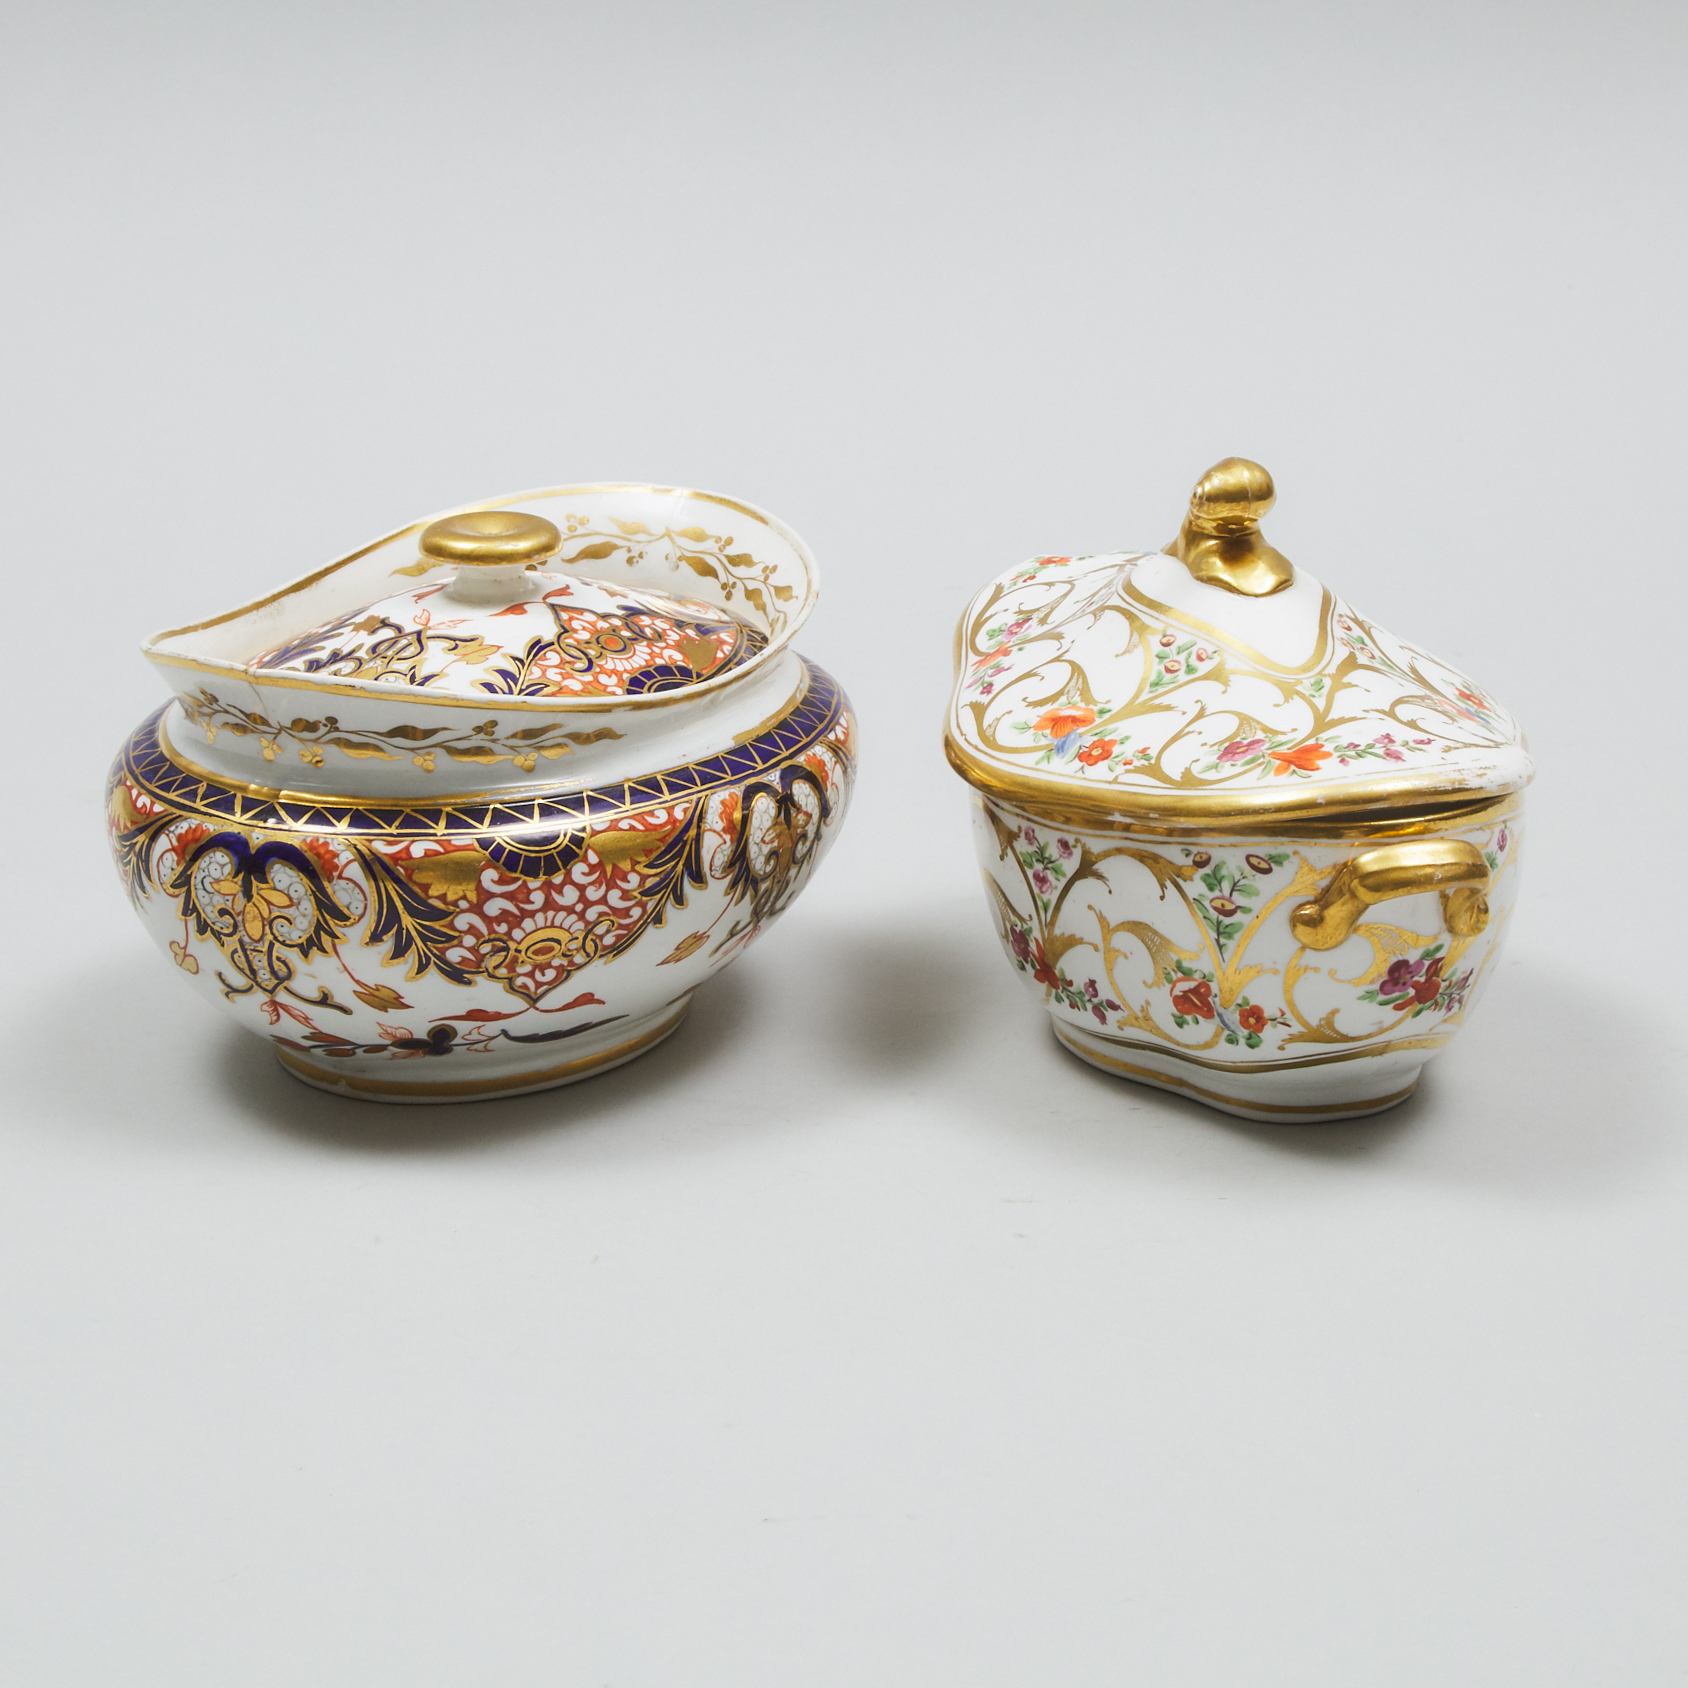 A Derby Covered Tureen, and another, Spode, c.1820